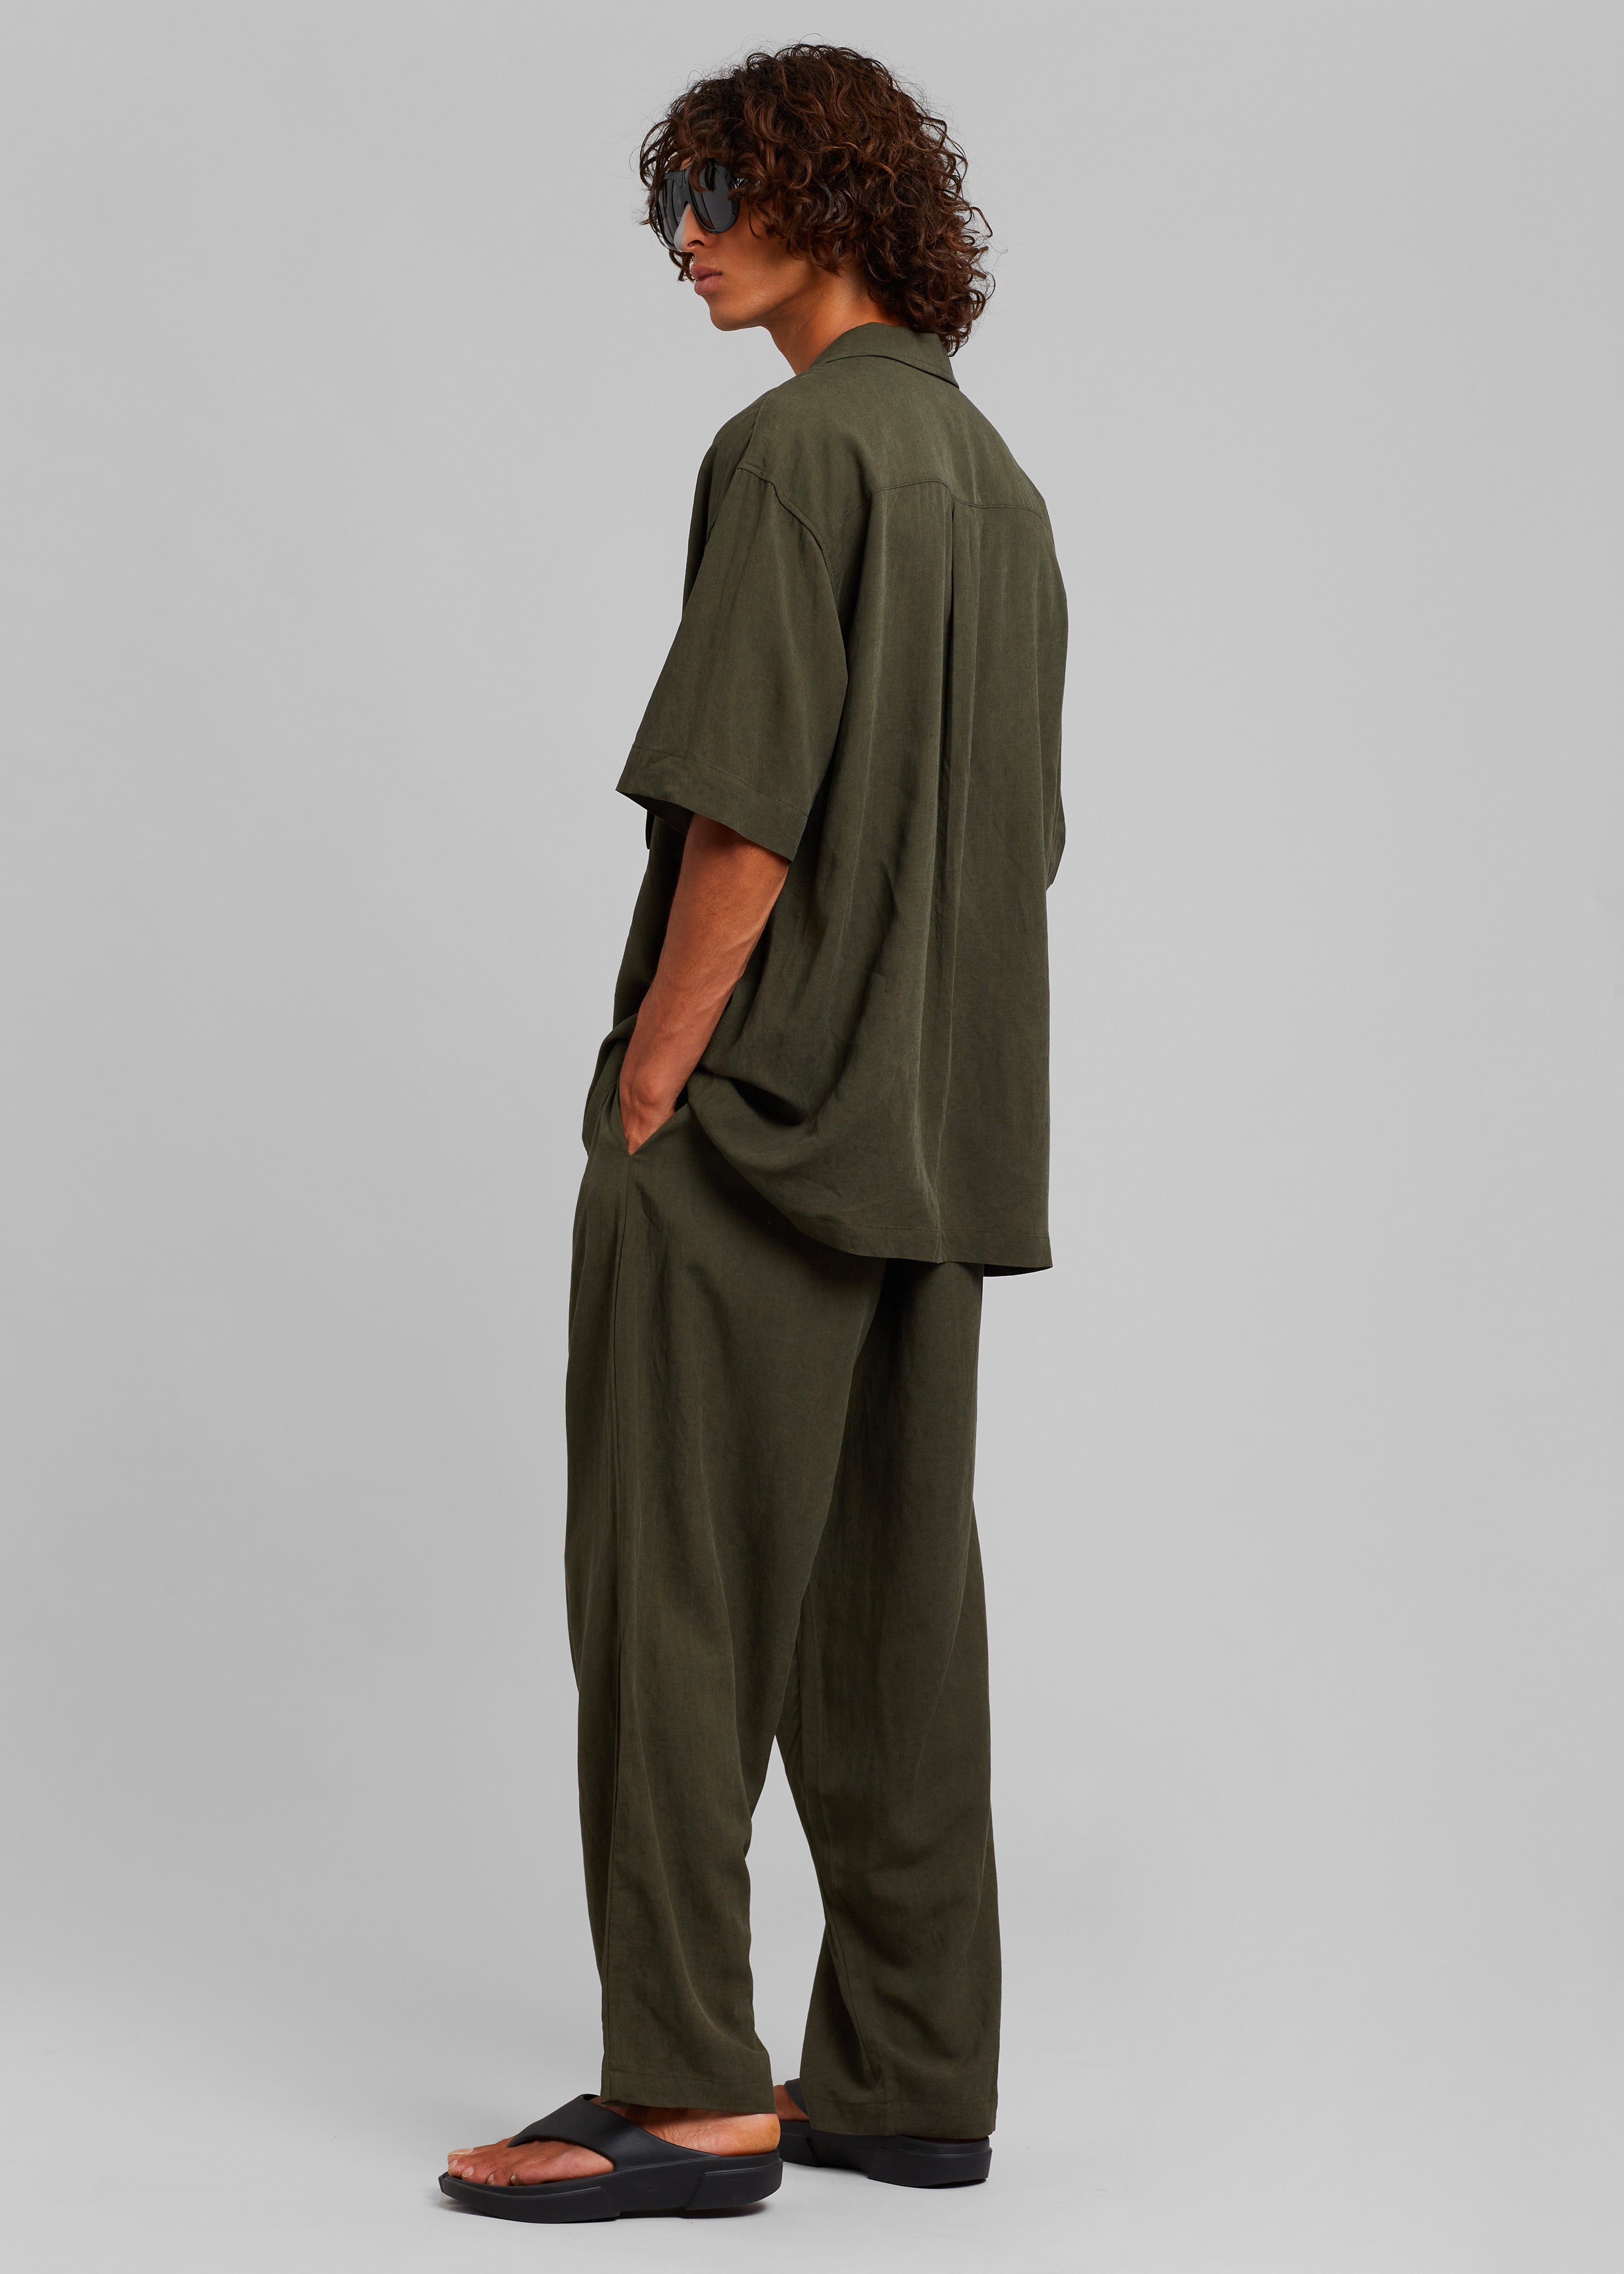 Georg Puch Pants - Olive - 4